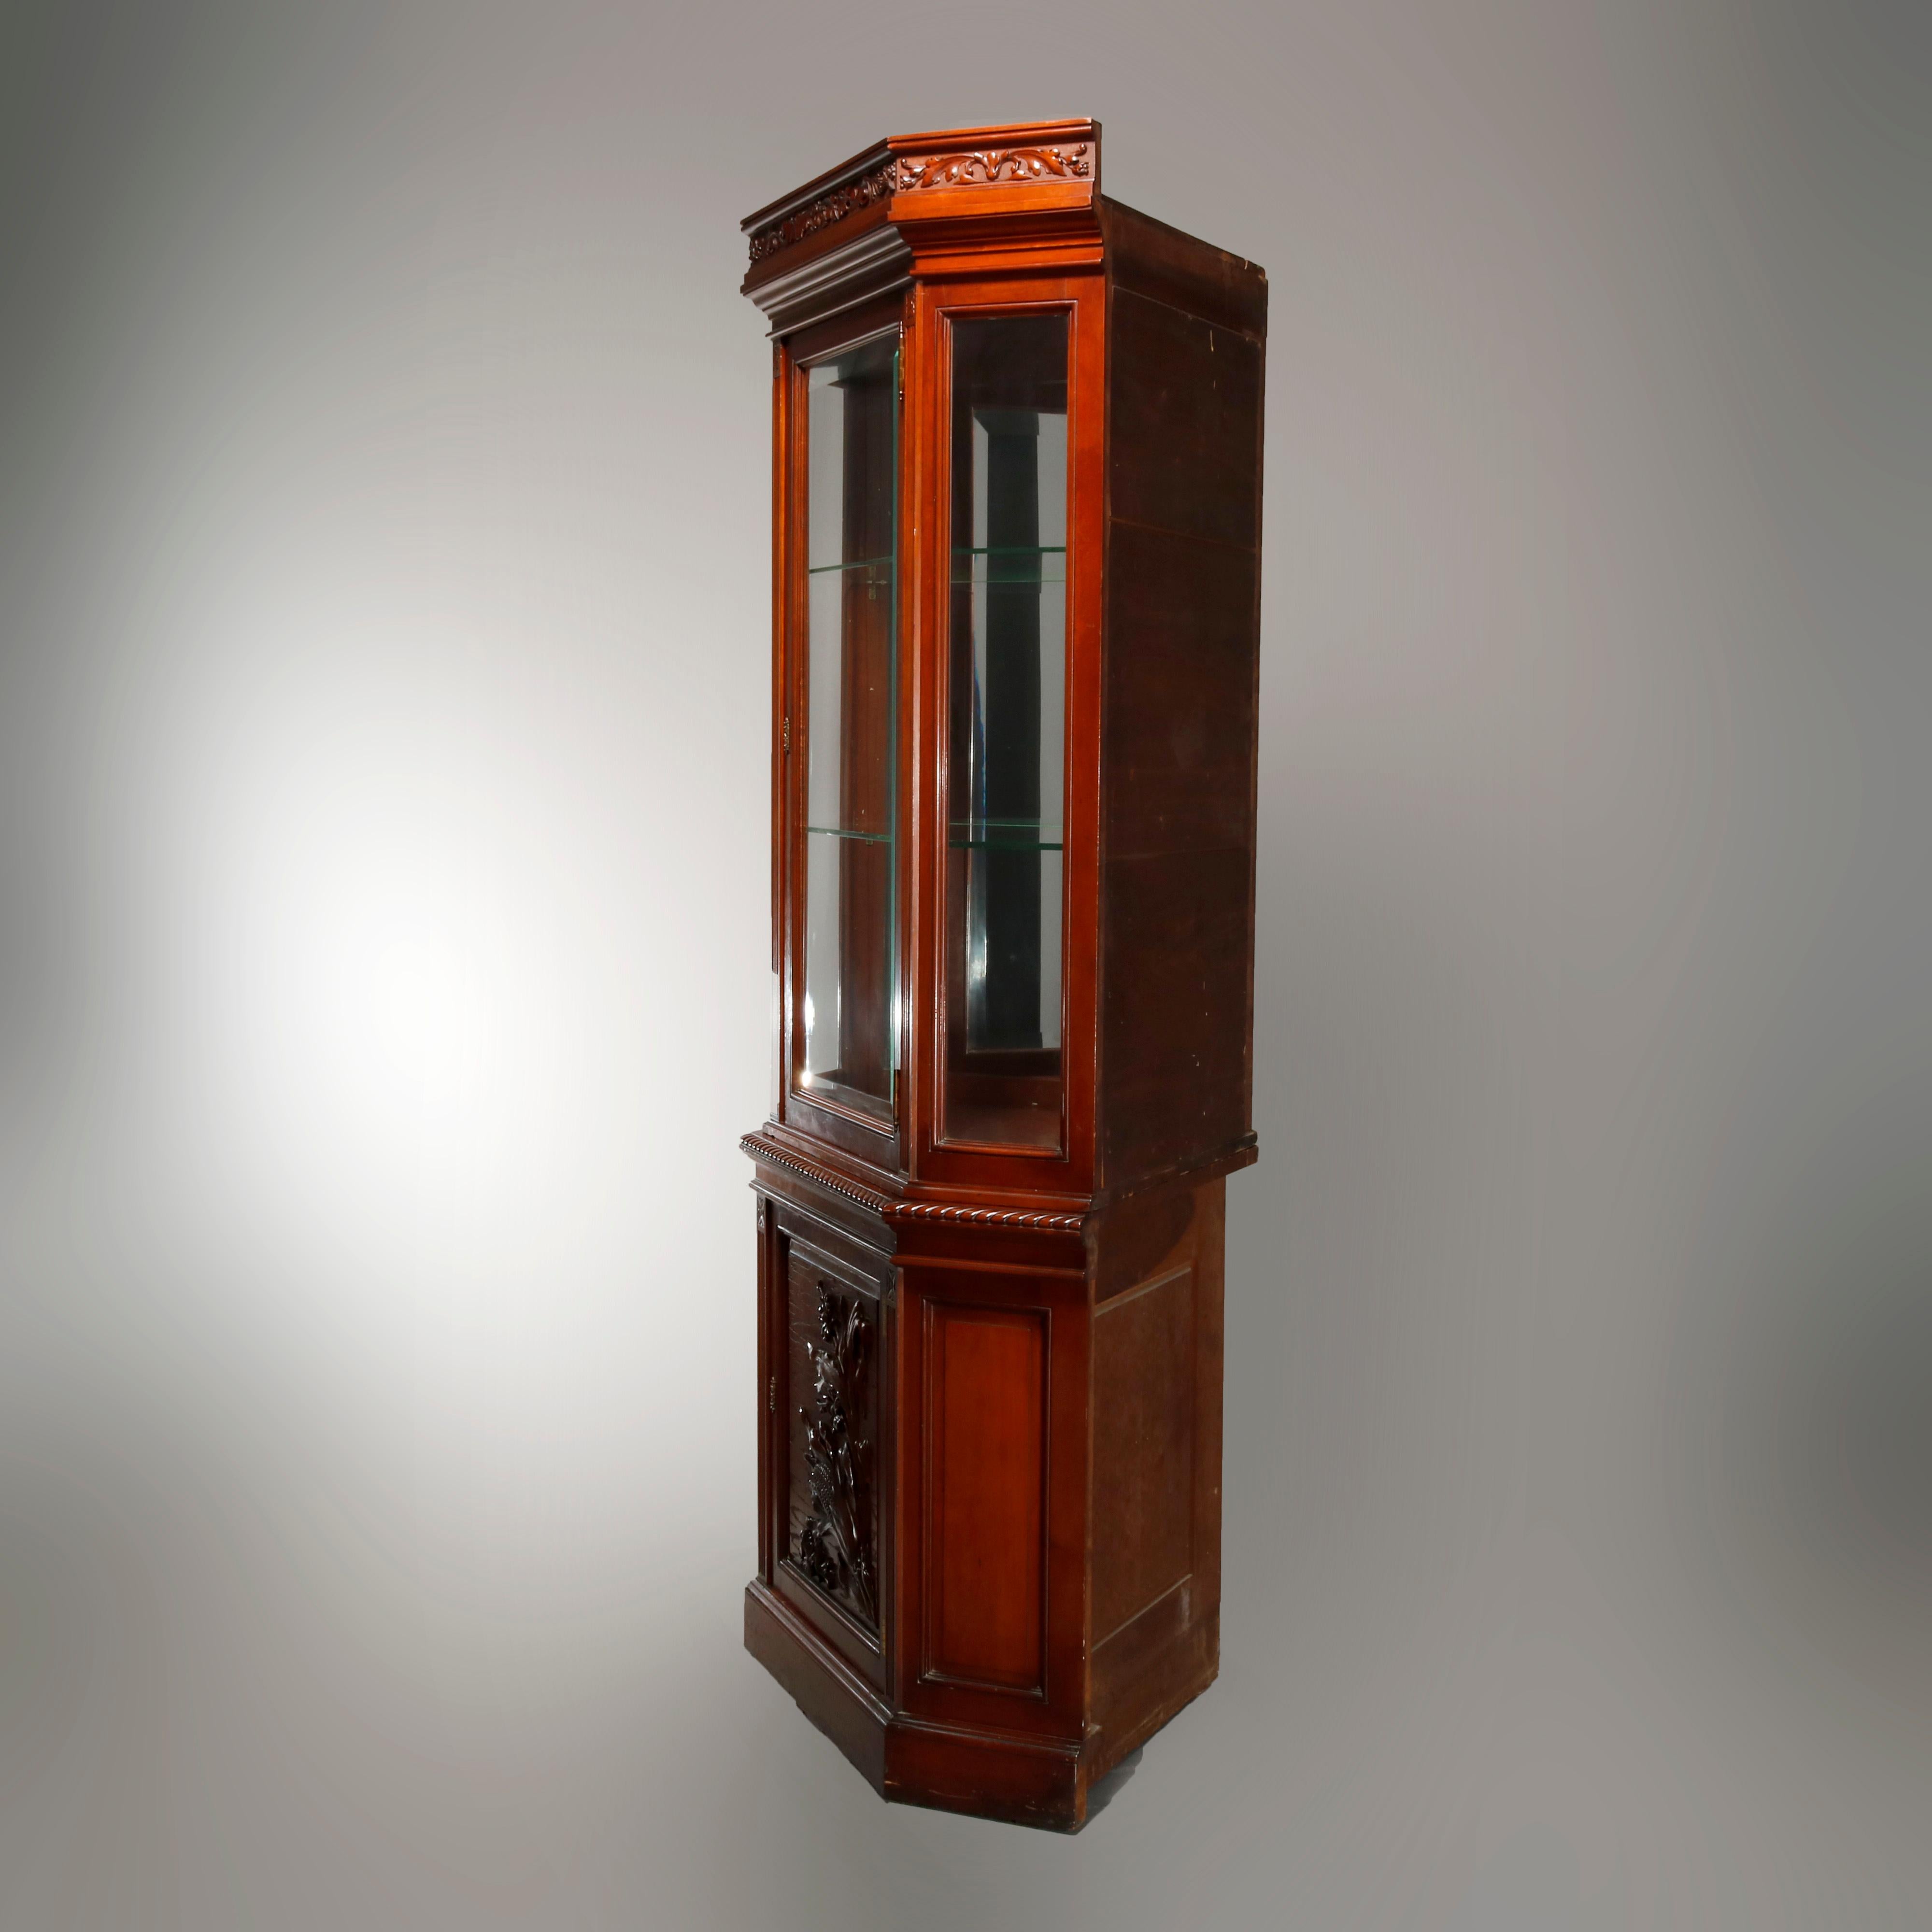 Antique Aesthetic Movement Carved Cherry Faceted & Mirrored Corner Cabinet c1890 For Sale 5